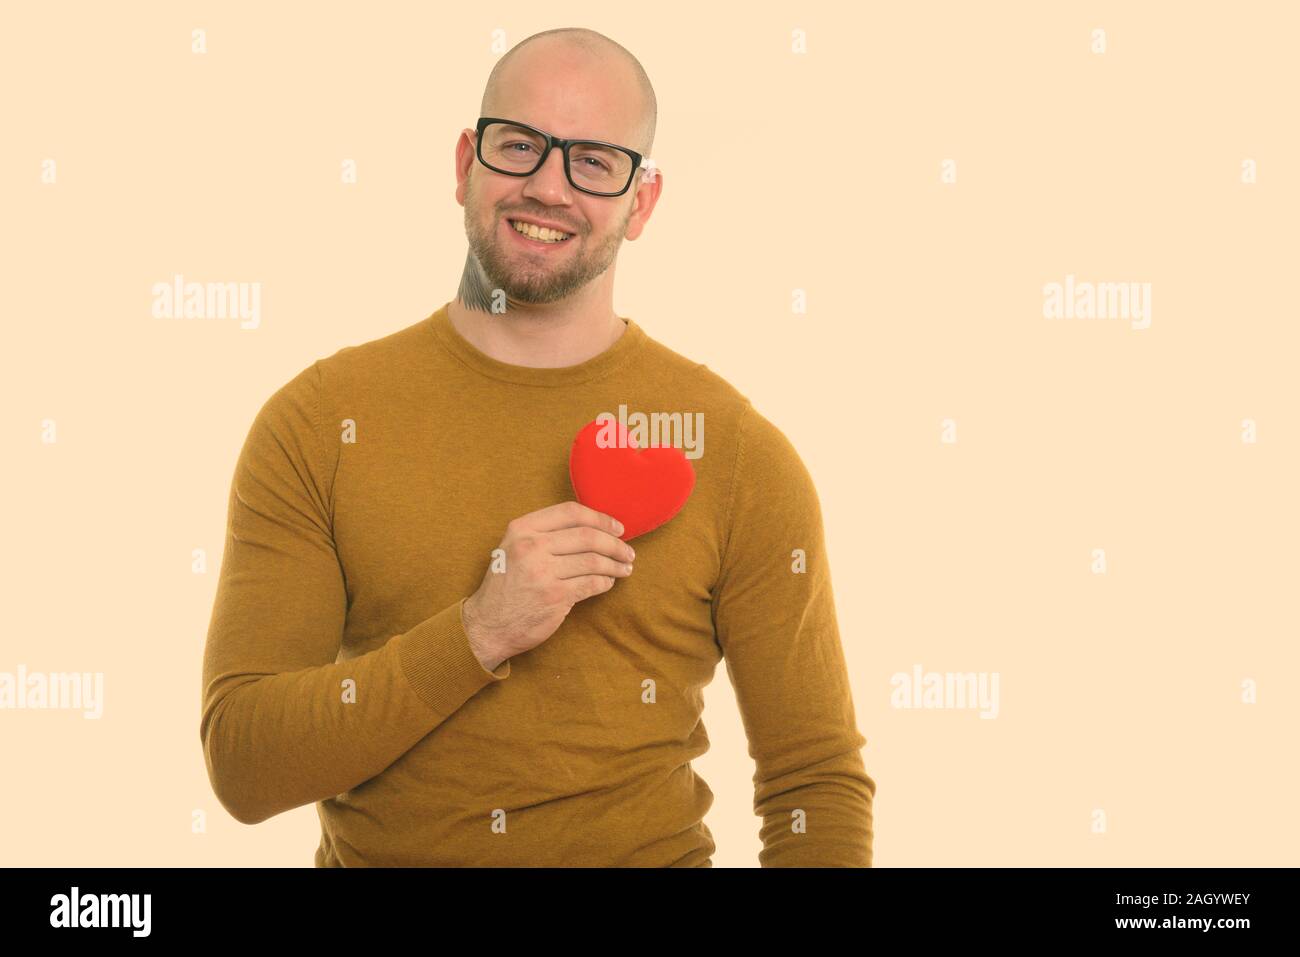 Young happy bald muscular man smiling while holding red heart against chest ready for Valentine's day Stock Photo